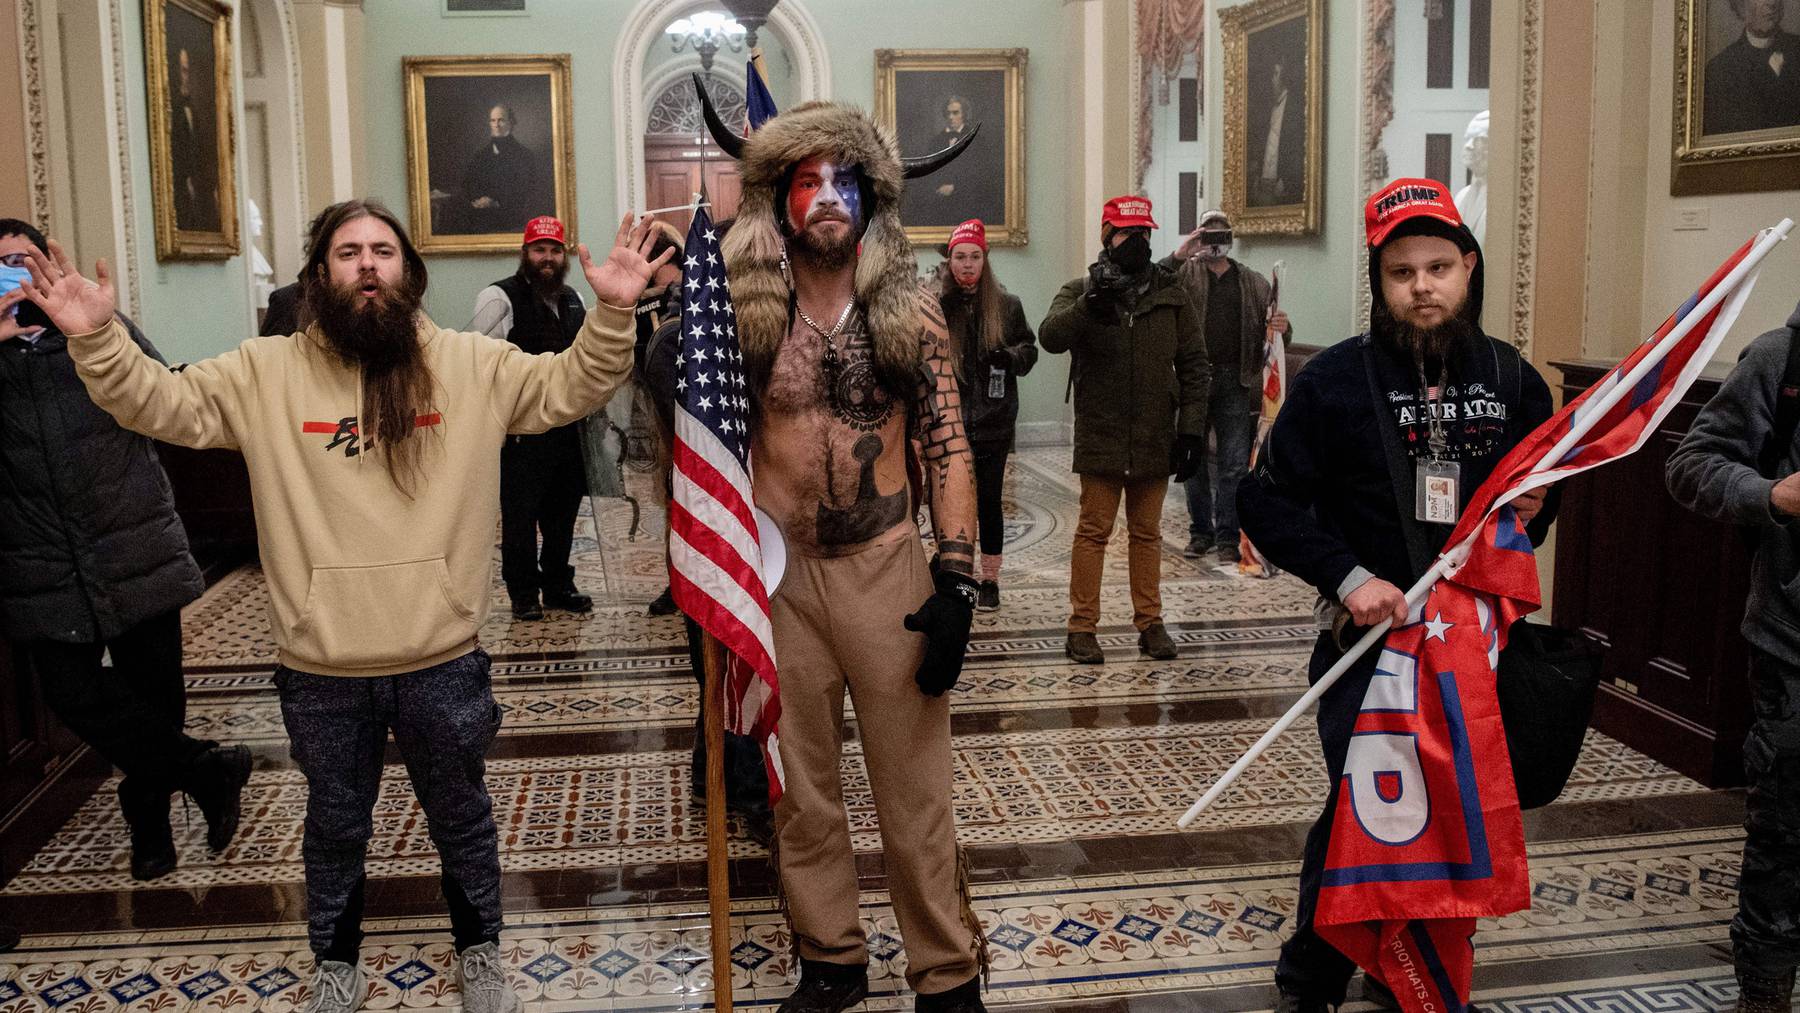 Supporters of US President Donald Trump, including Jake Angeli, a QAnon supporter known for his painted face and horned hat, enter the US Capitol. Getty Images.